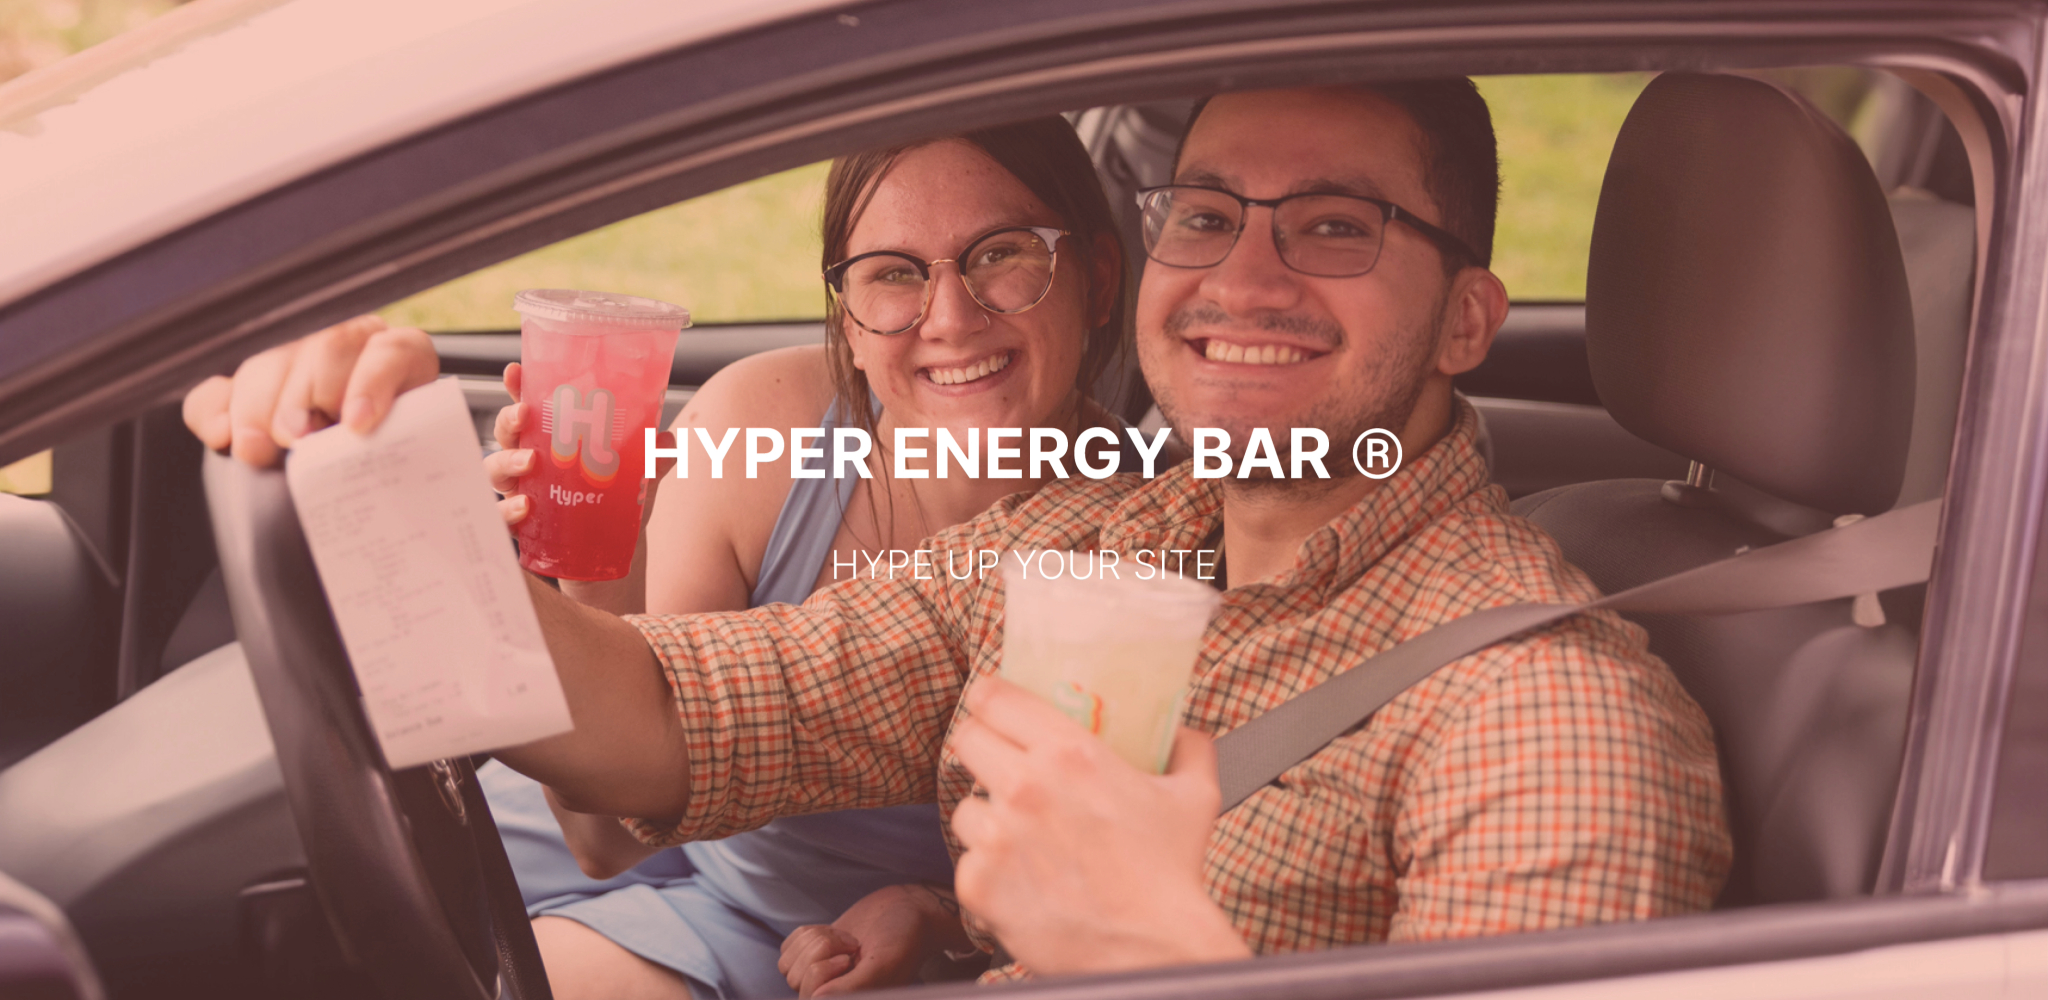 Energize your development with Hyper Energy ar